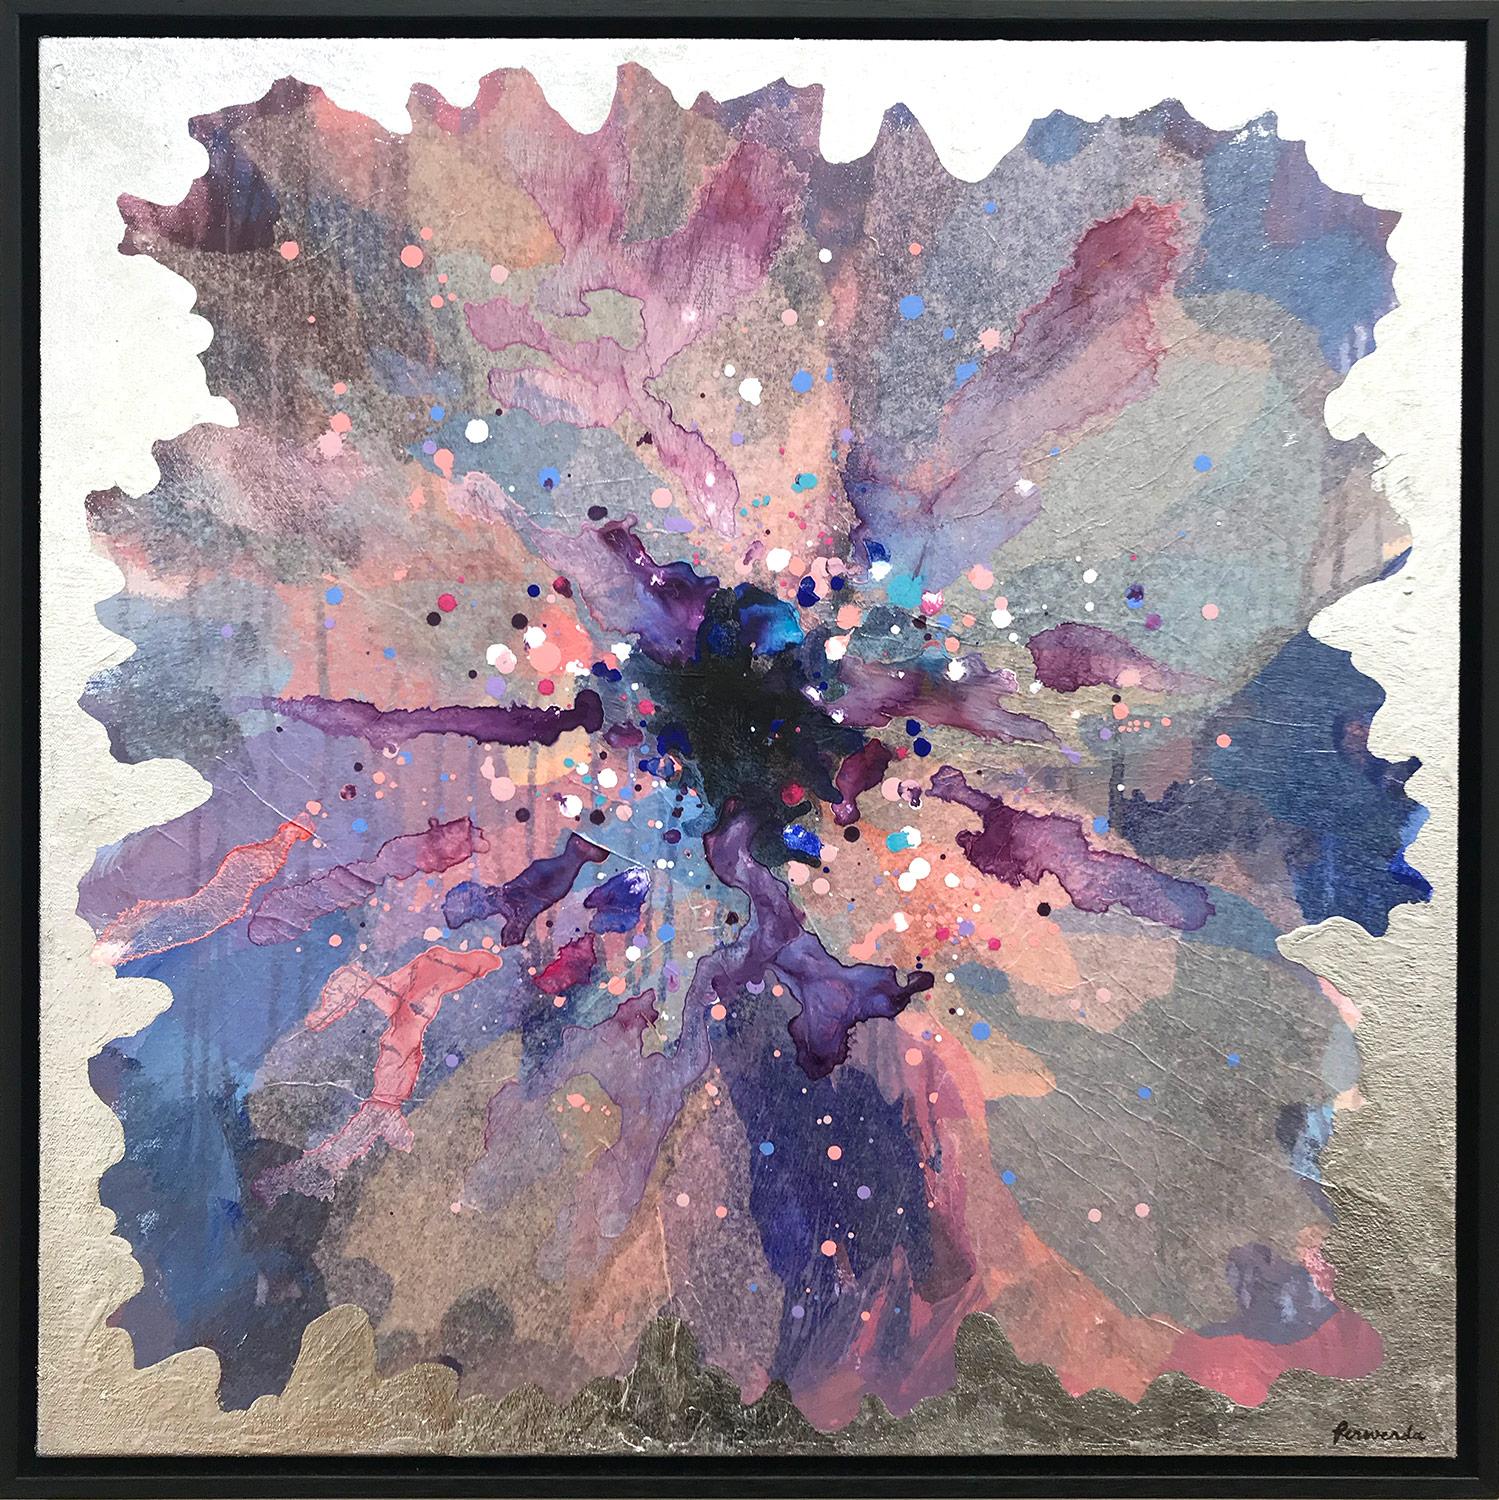 Antoinette Ferwerda Abstract Painting - "Mauve Periwinkle" Contemporary Layered Mixed Media Floral Painting on Canvas